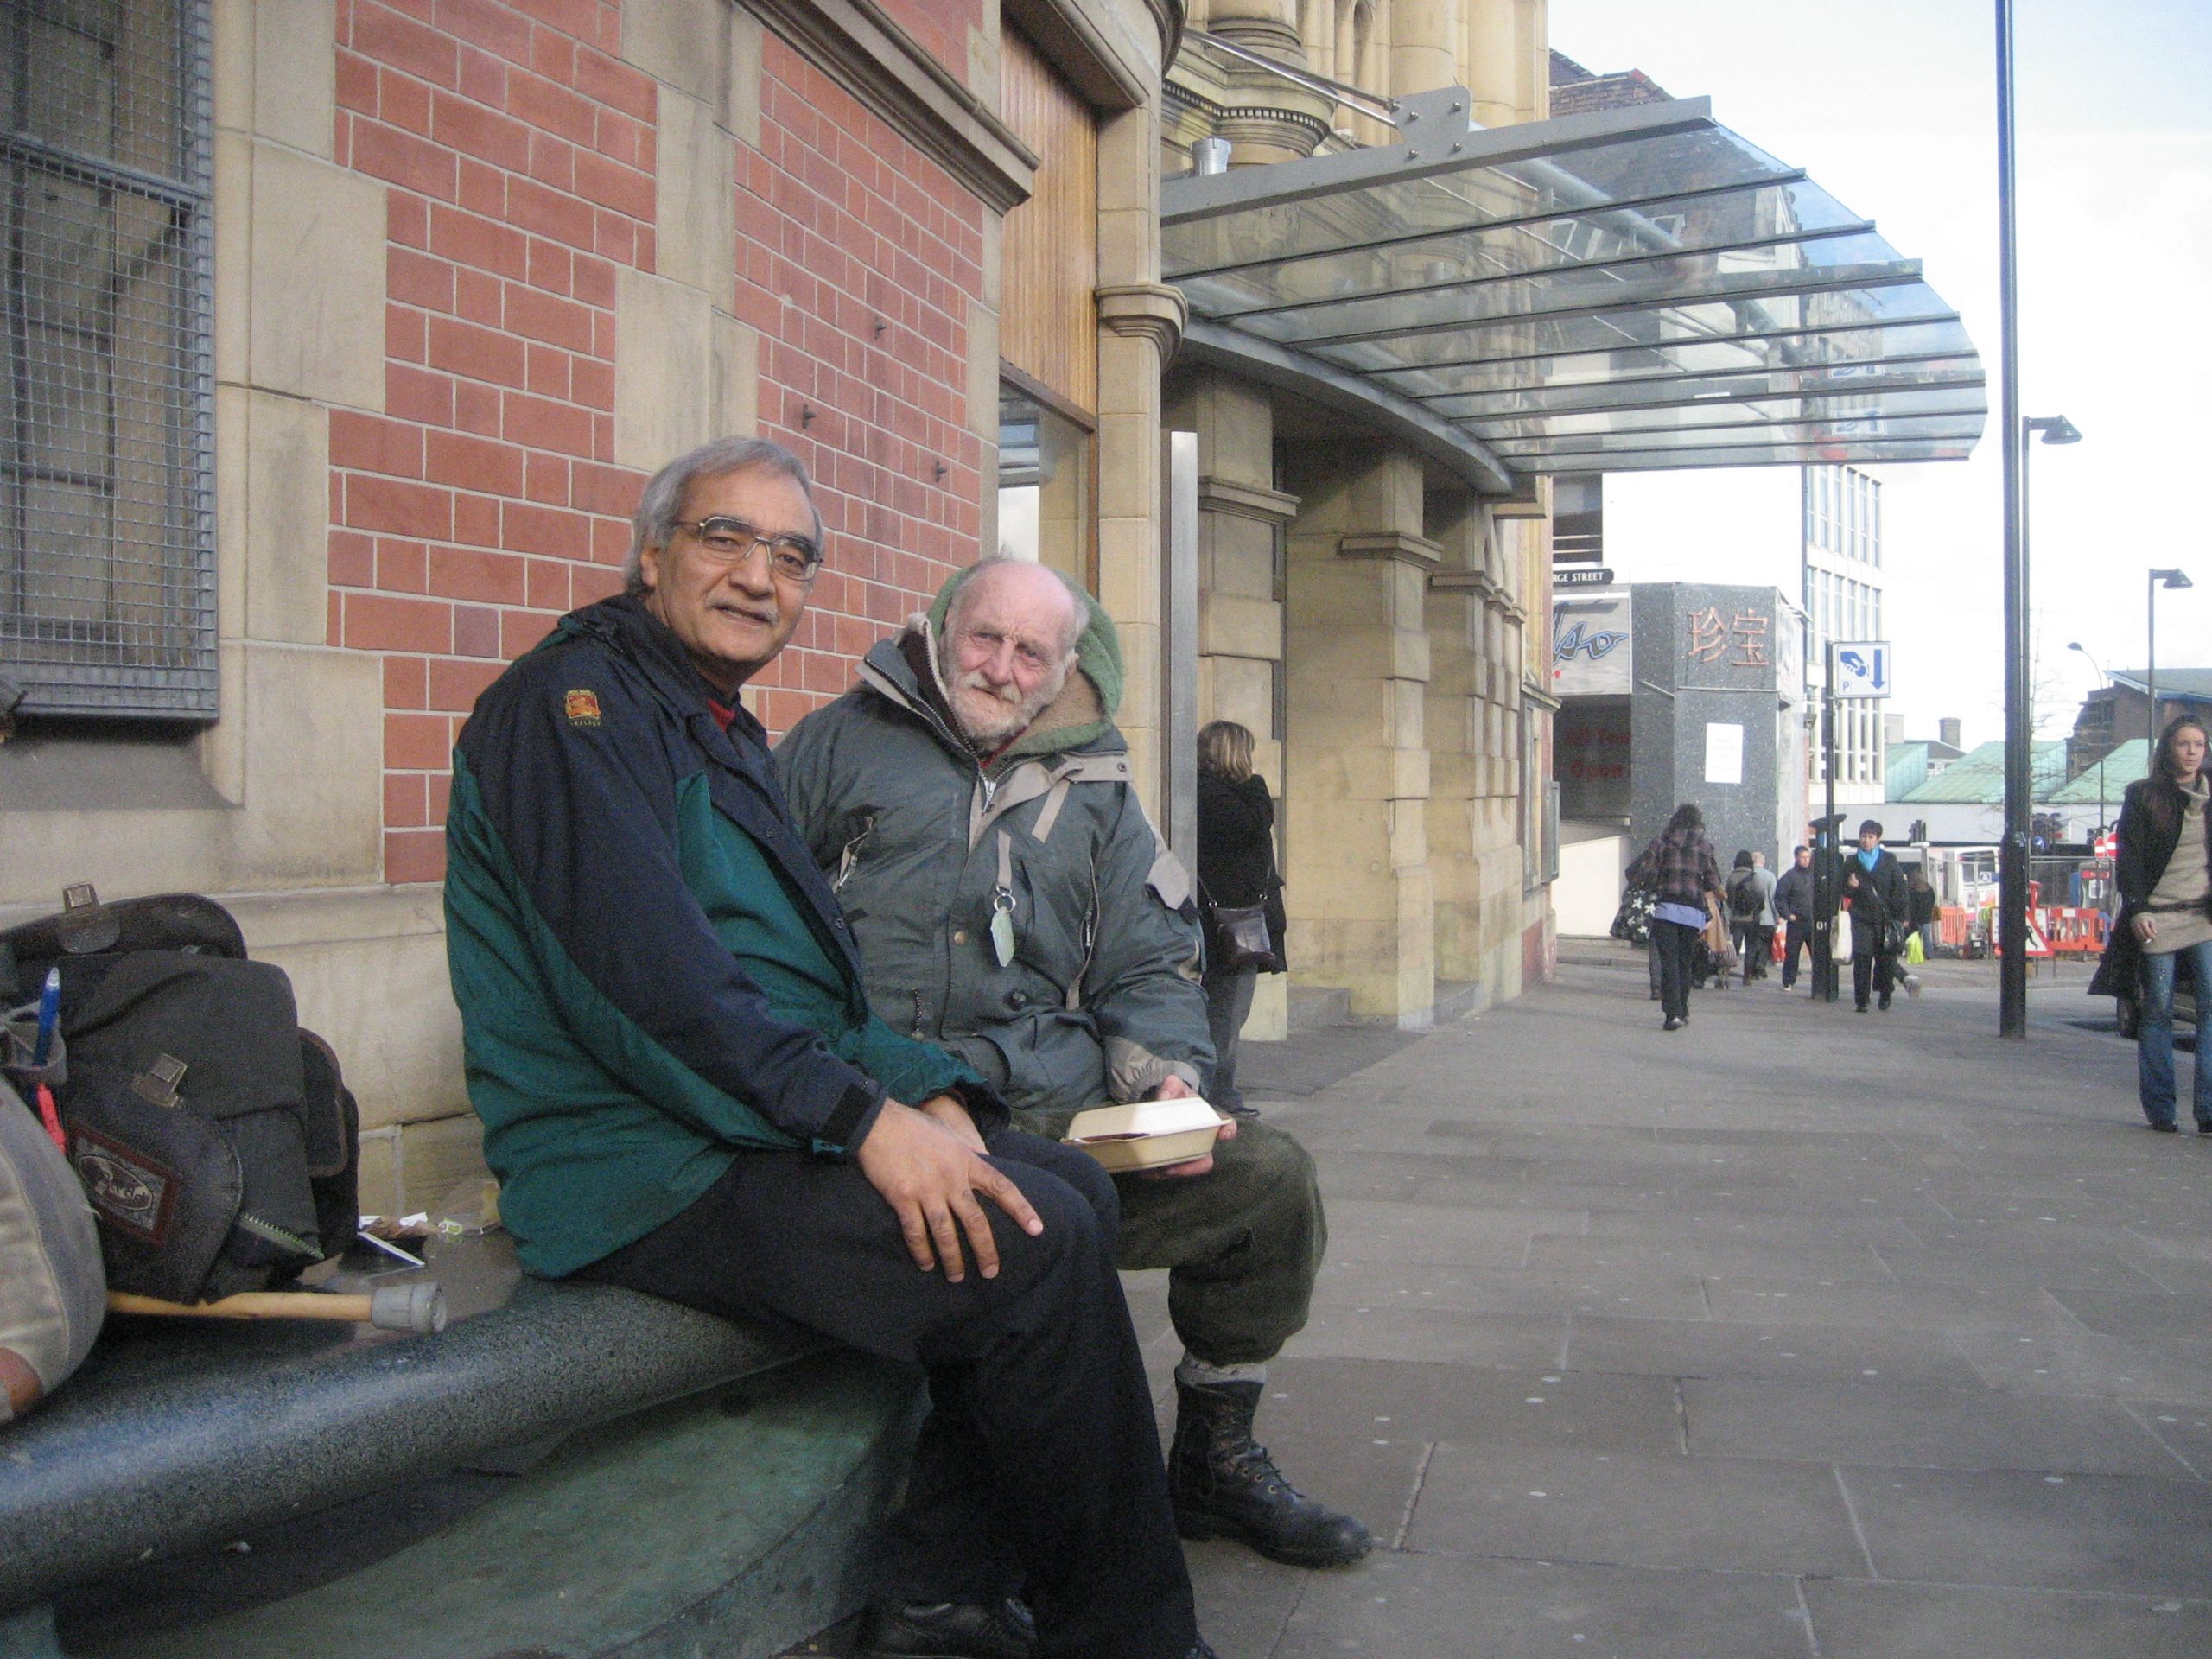 Inderjit and Albert eat bread together in Sheffield